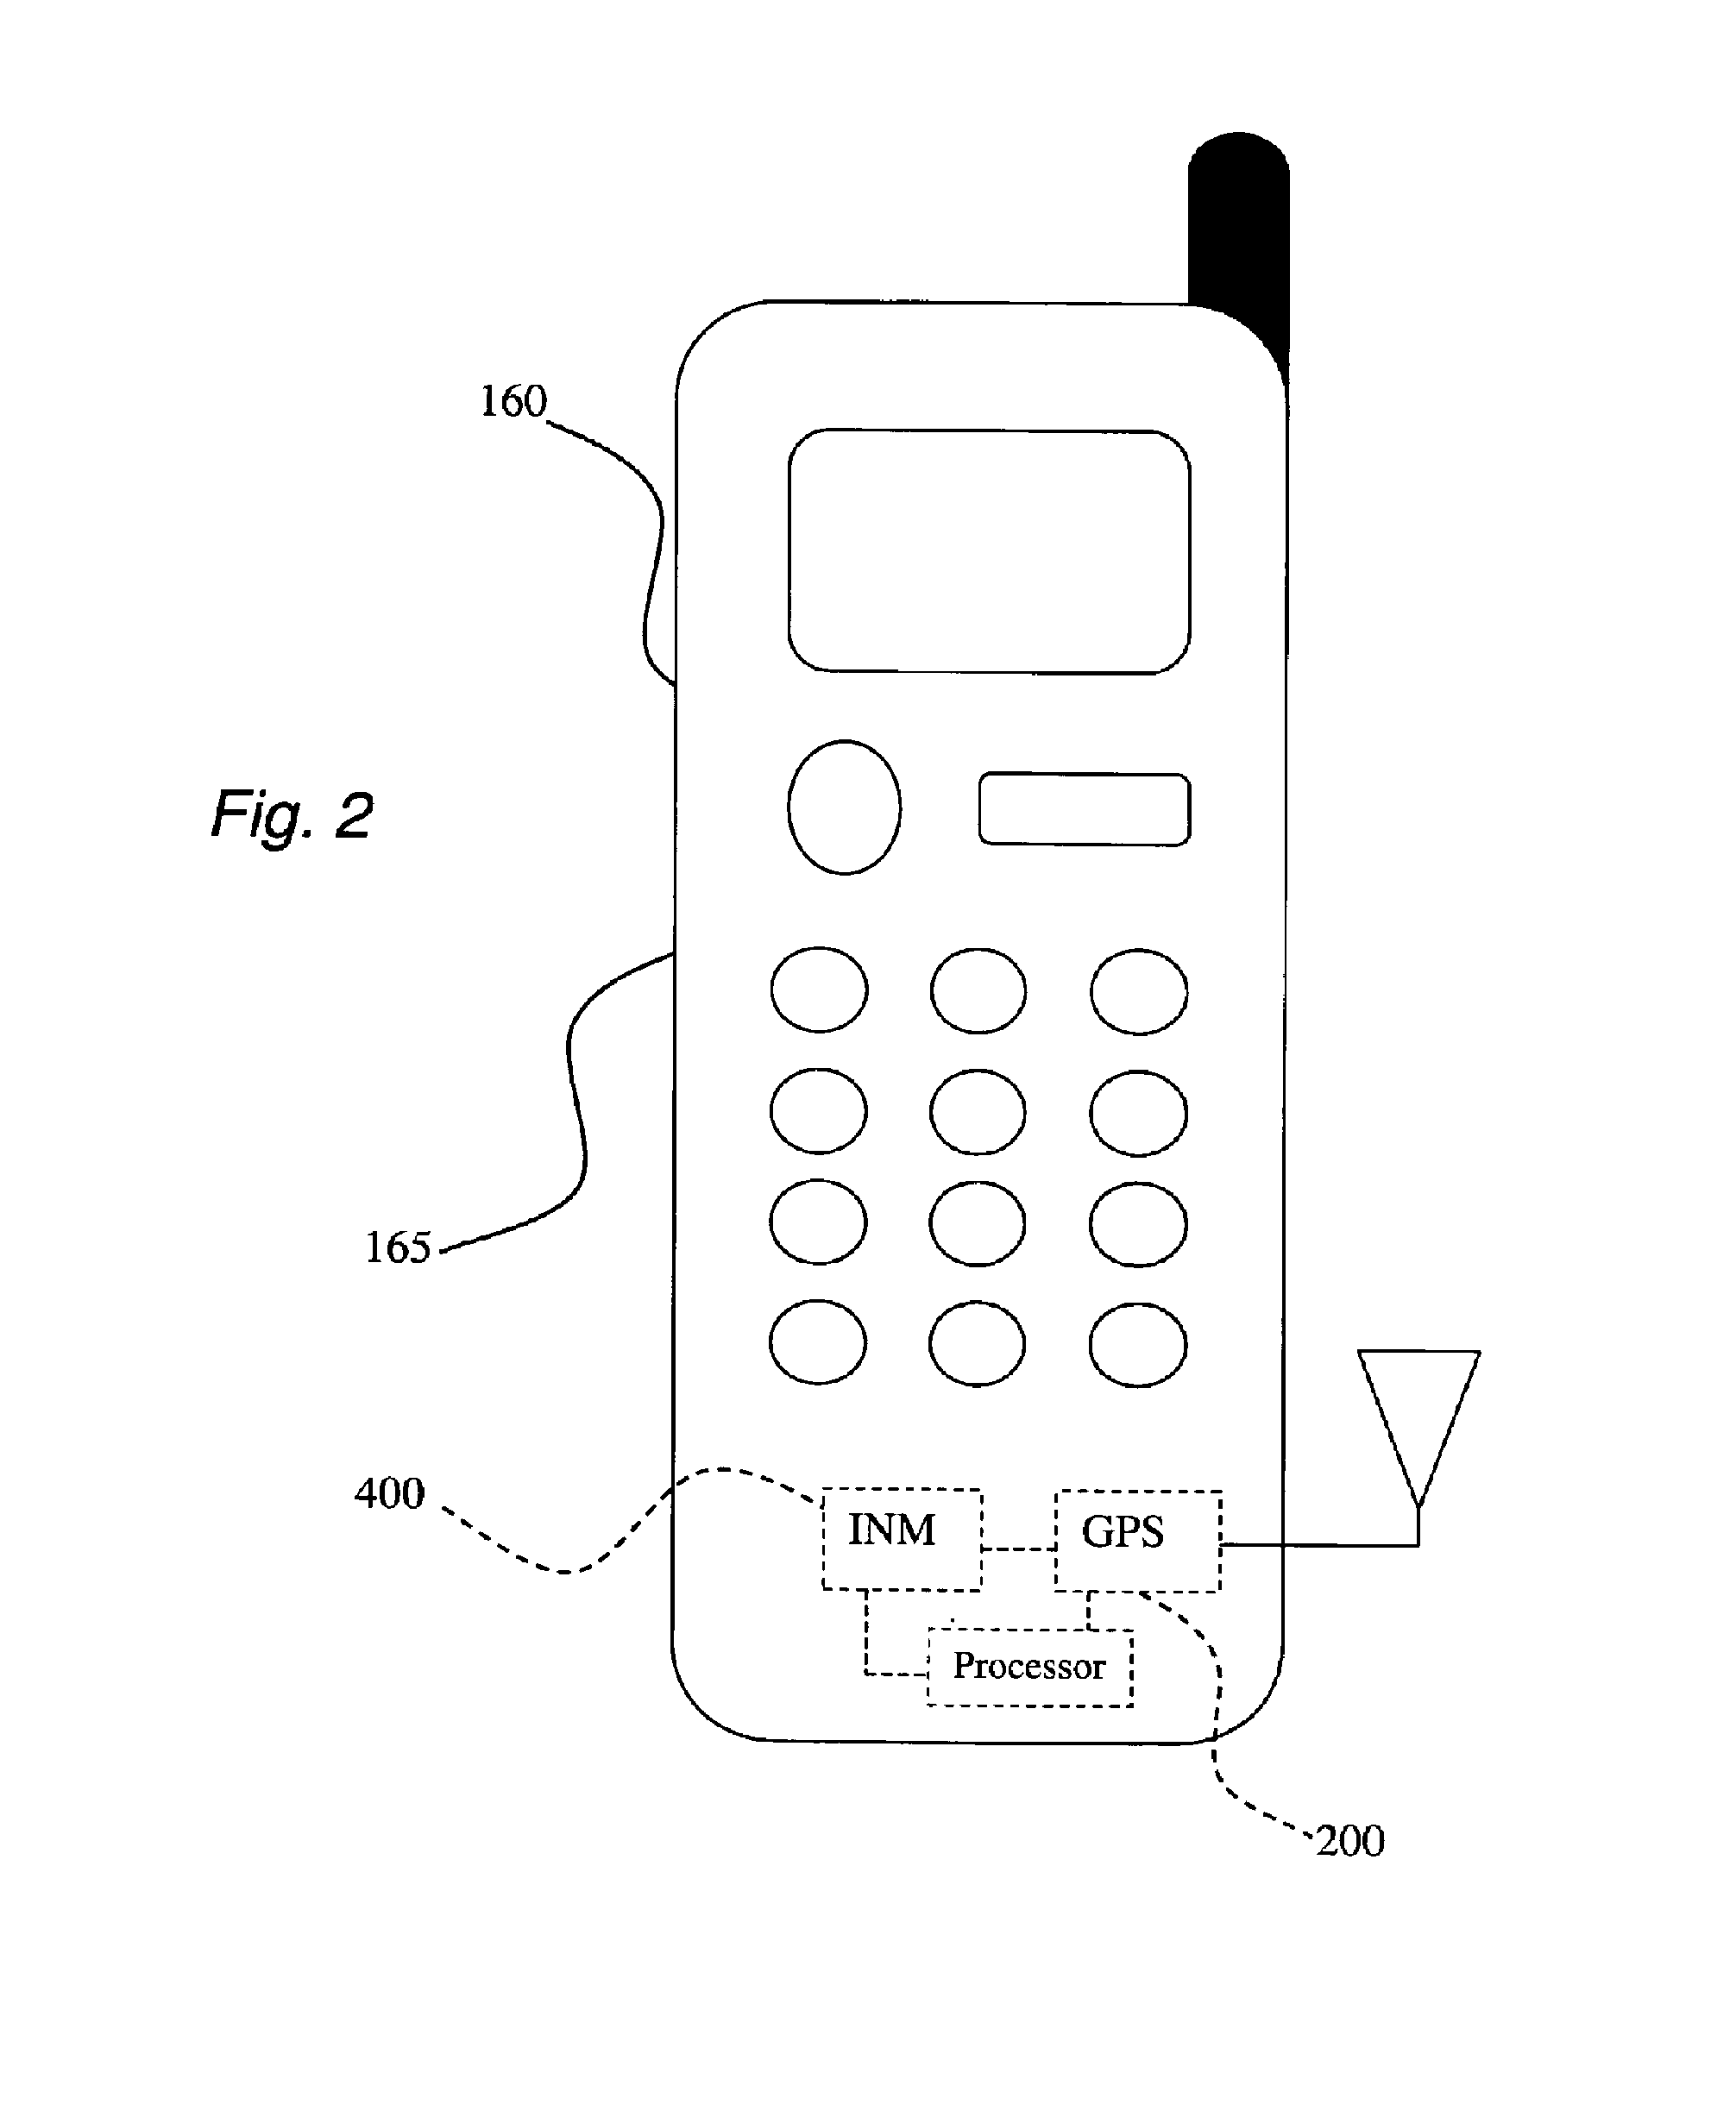 Method and system for monitoring and validating electronic transactions